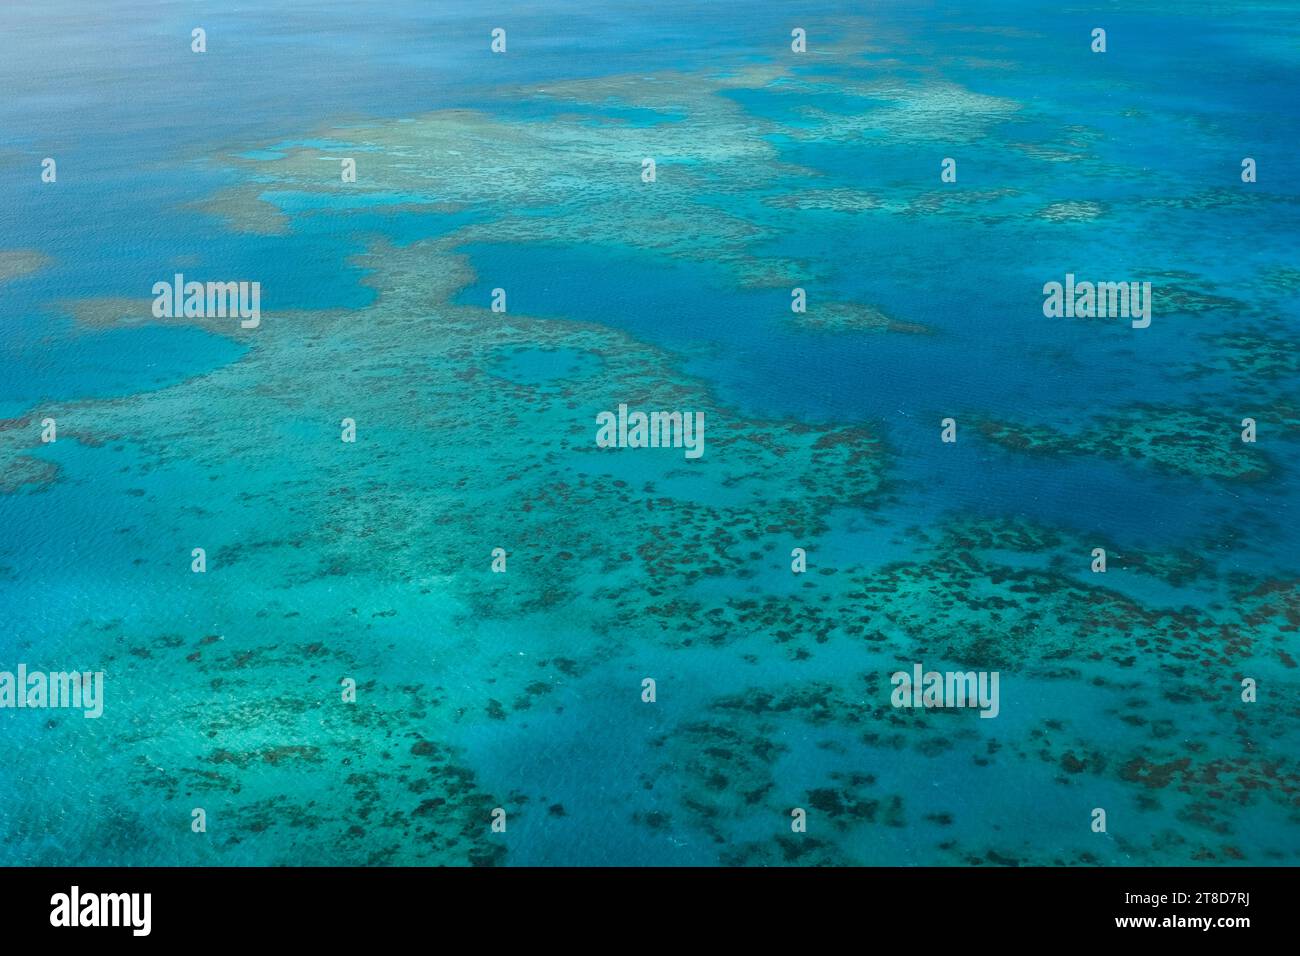 An aerial view of the coral reefs, white sand bars, tropical isles and clear turquoise waters of the Great Barrier Reef — Coral Sea, Cairns Stock Photo